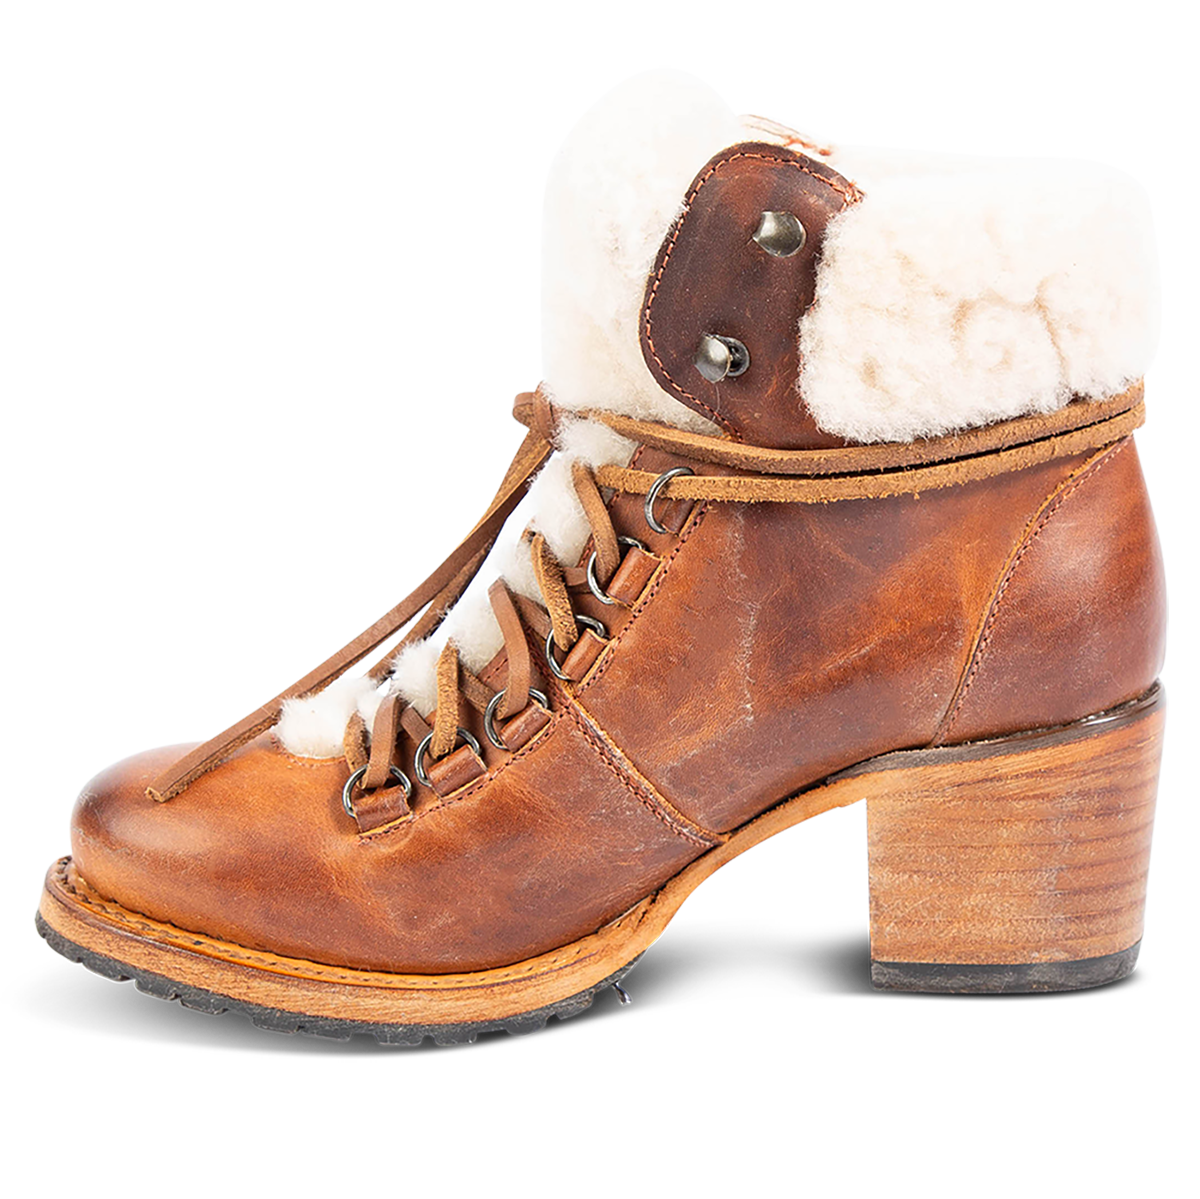 Inside view showing shearling ankle trim and wrap around leather lacing on FREEBIRD women's Norway tan leather bootie